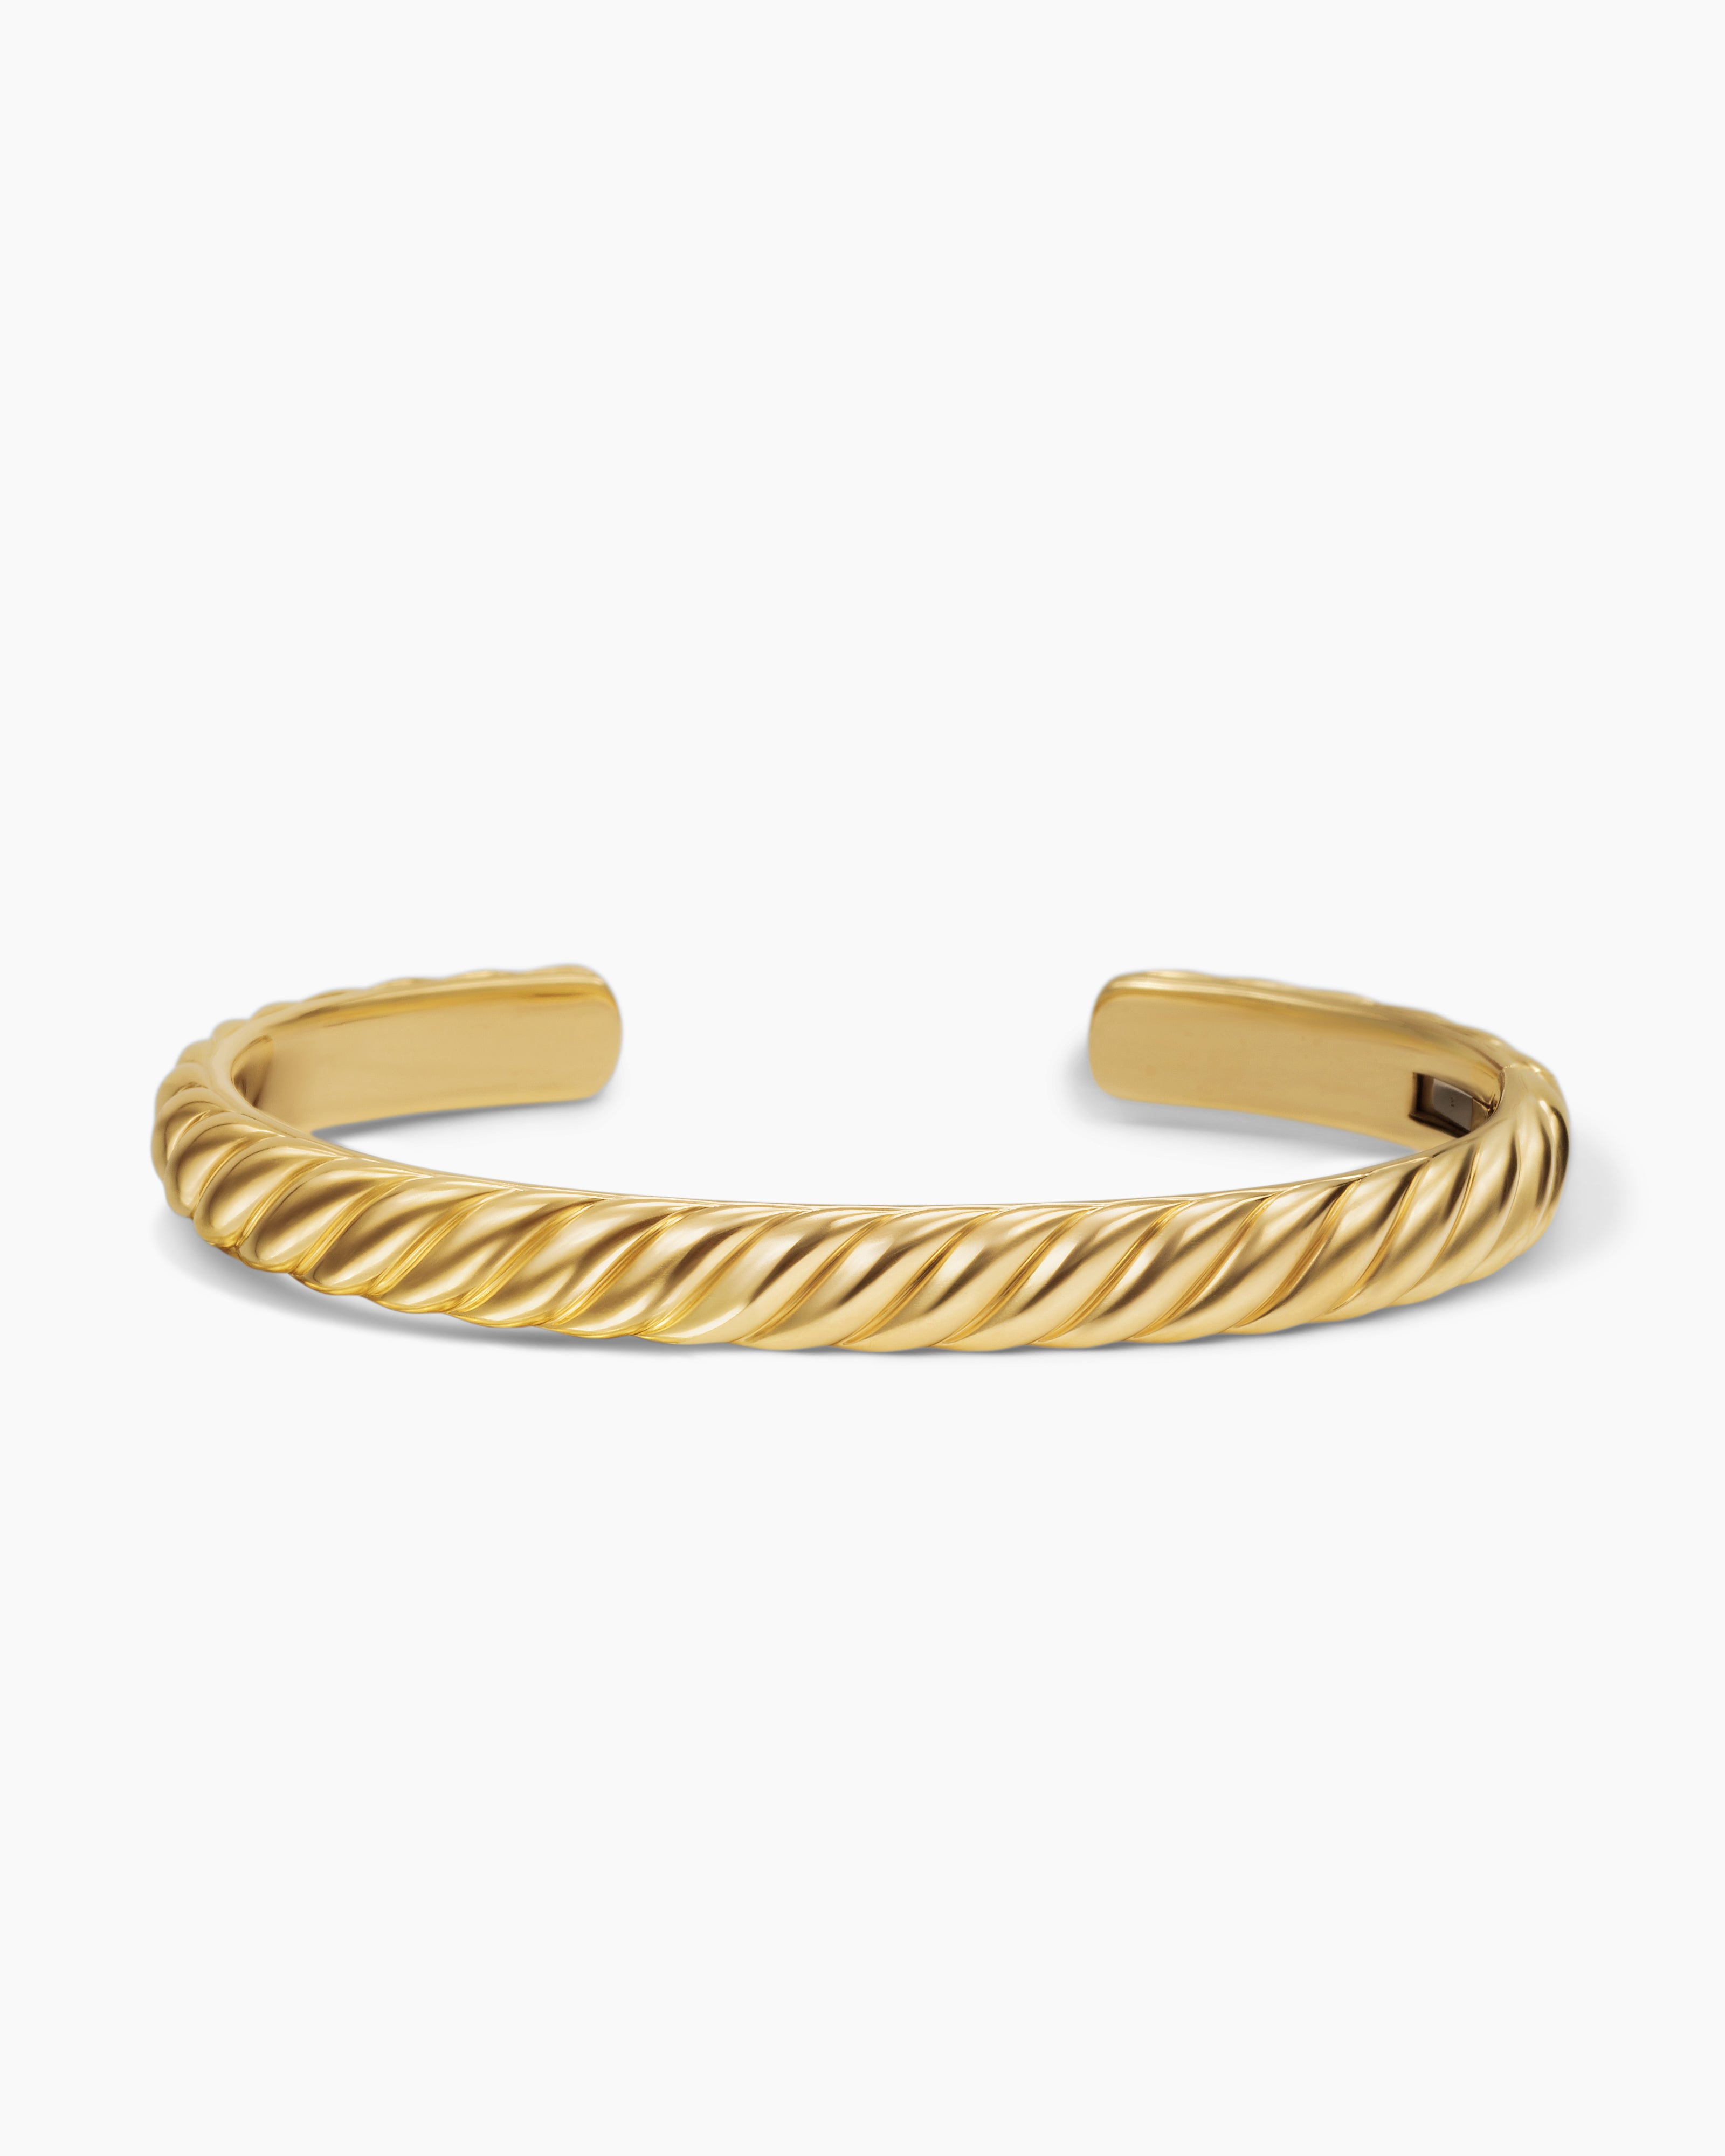 Sculpted Cable Cuff Bracelet in 18K Yellow Gold, 7mm | David Yurman